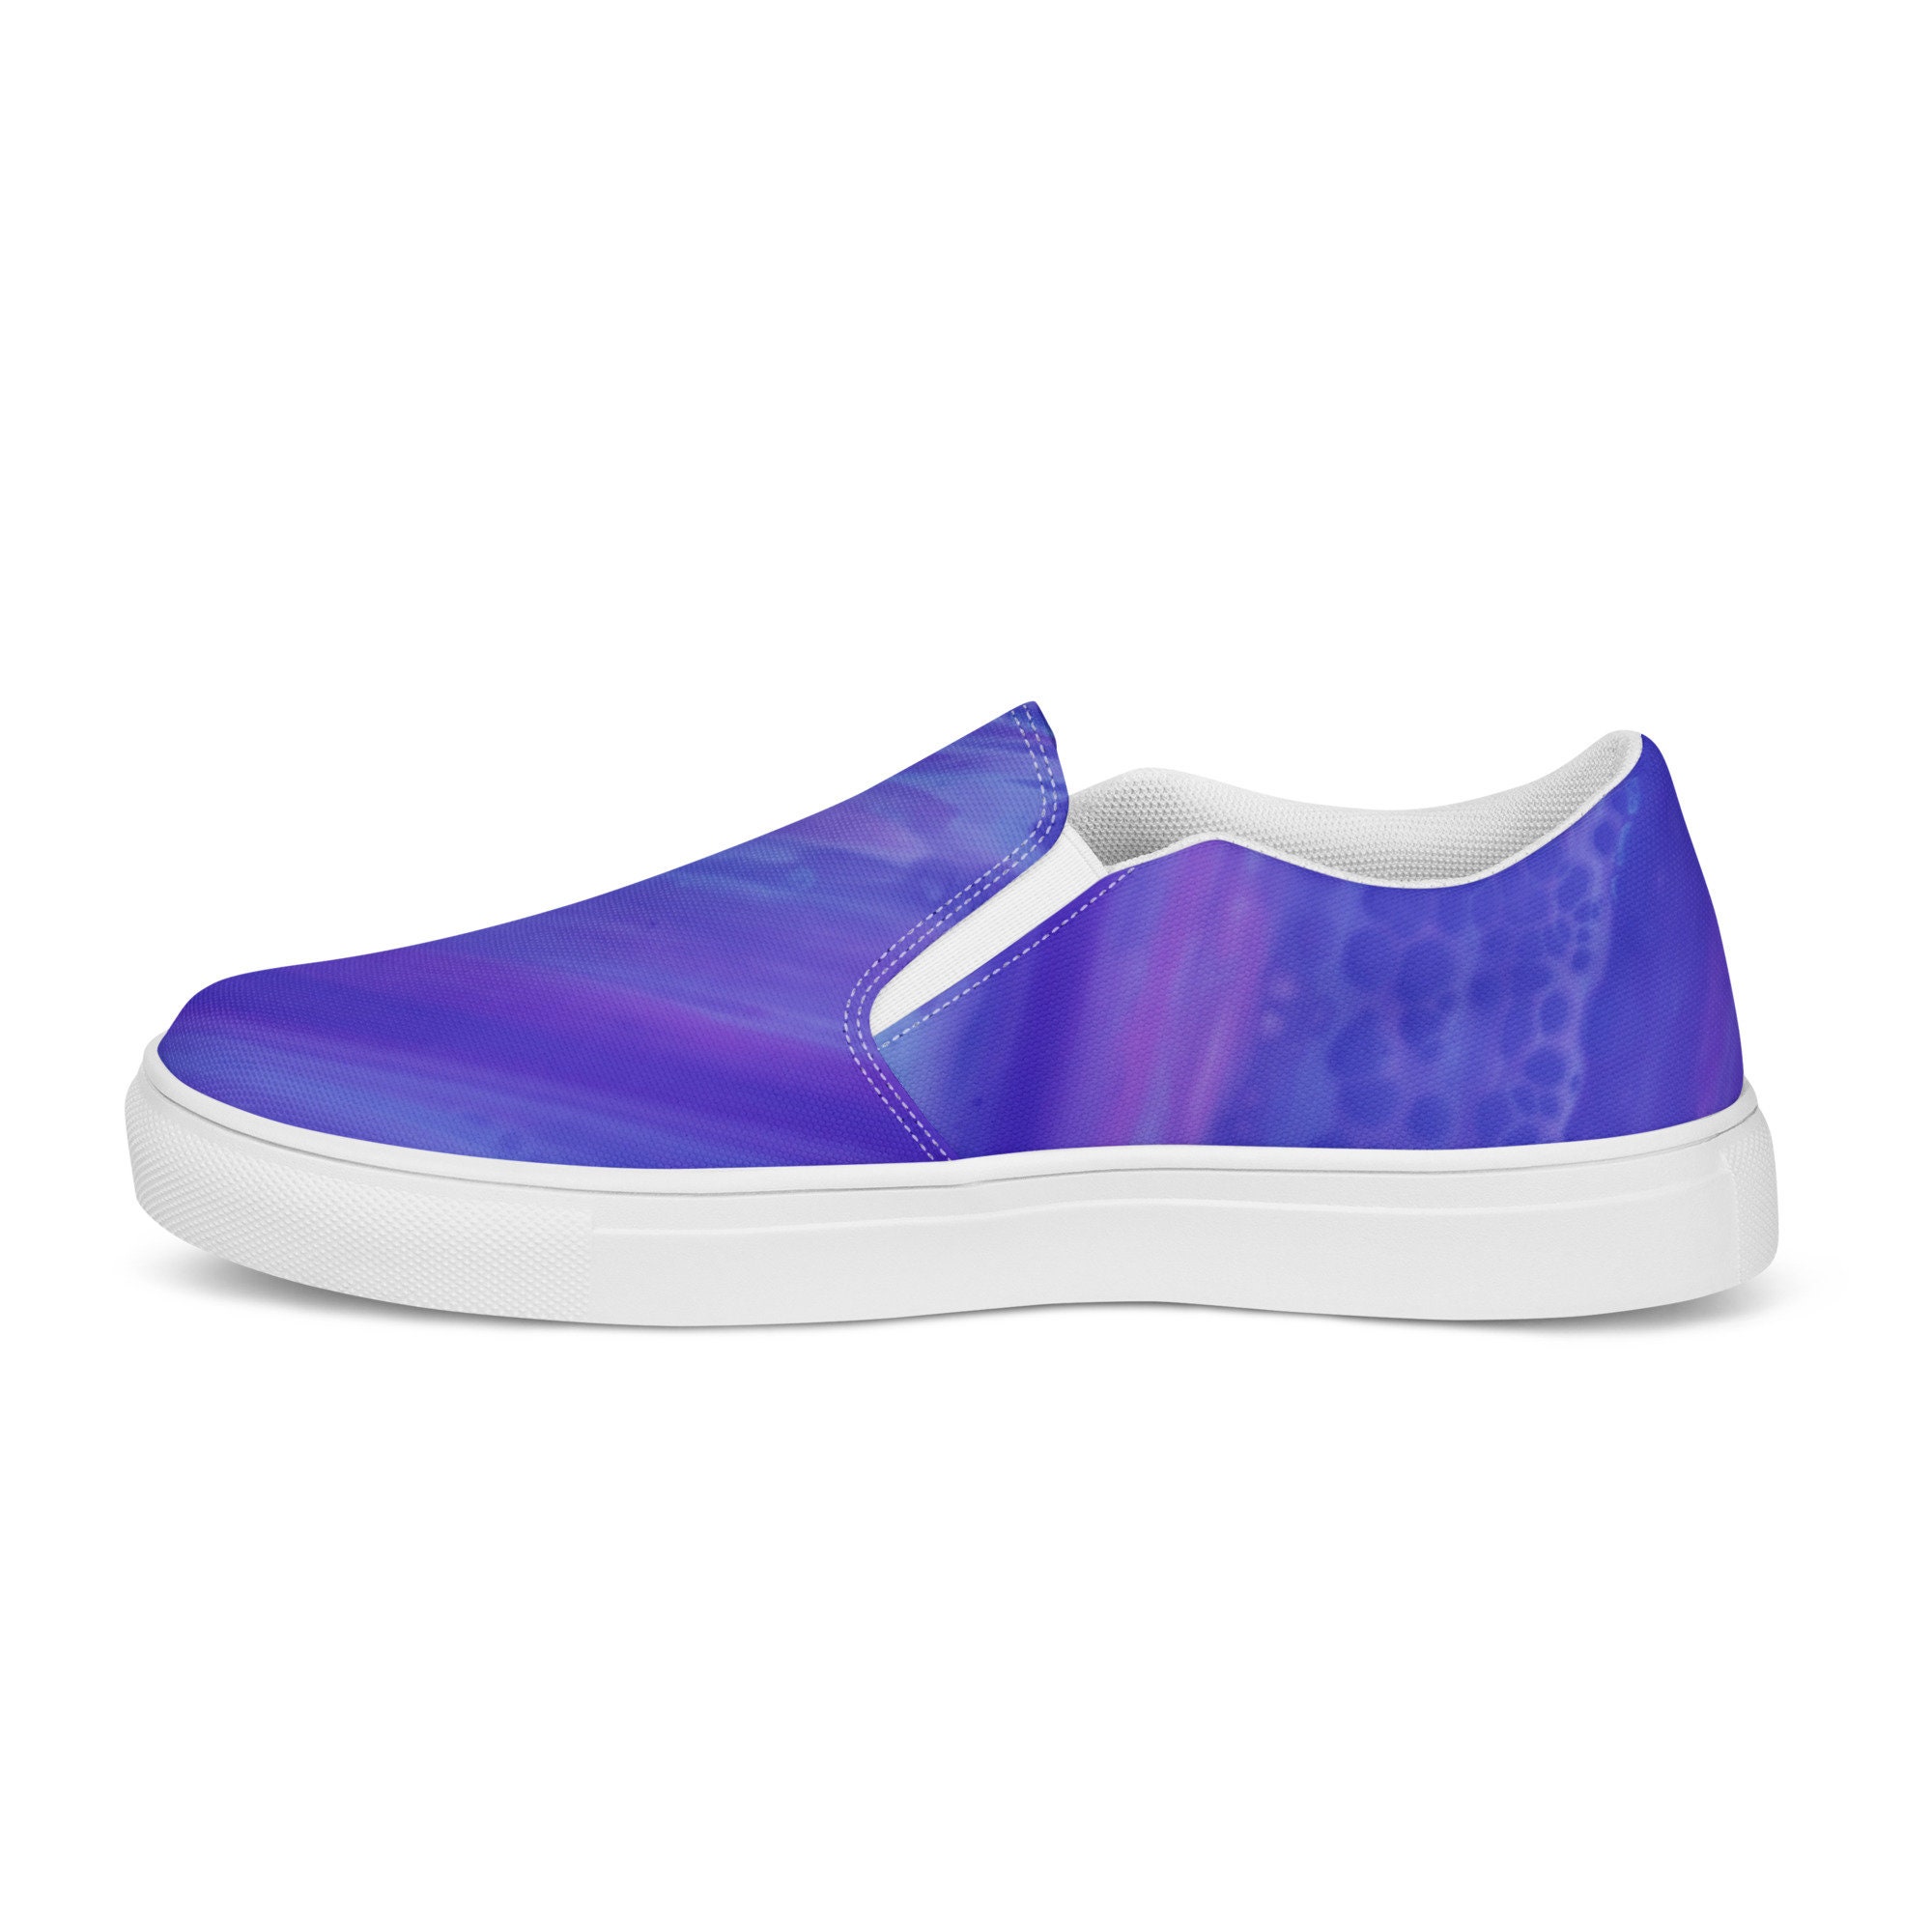 Discover Abstract Art Inspired Casual Slip On Shoes